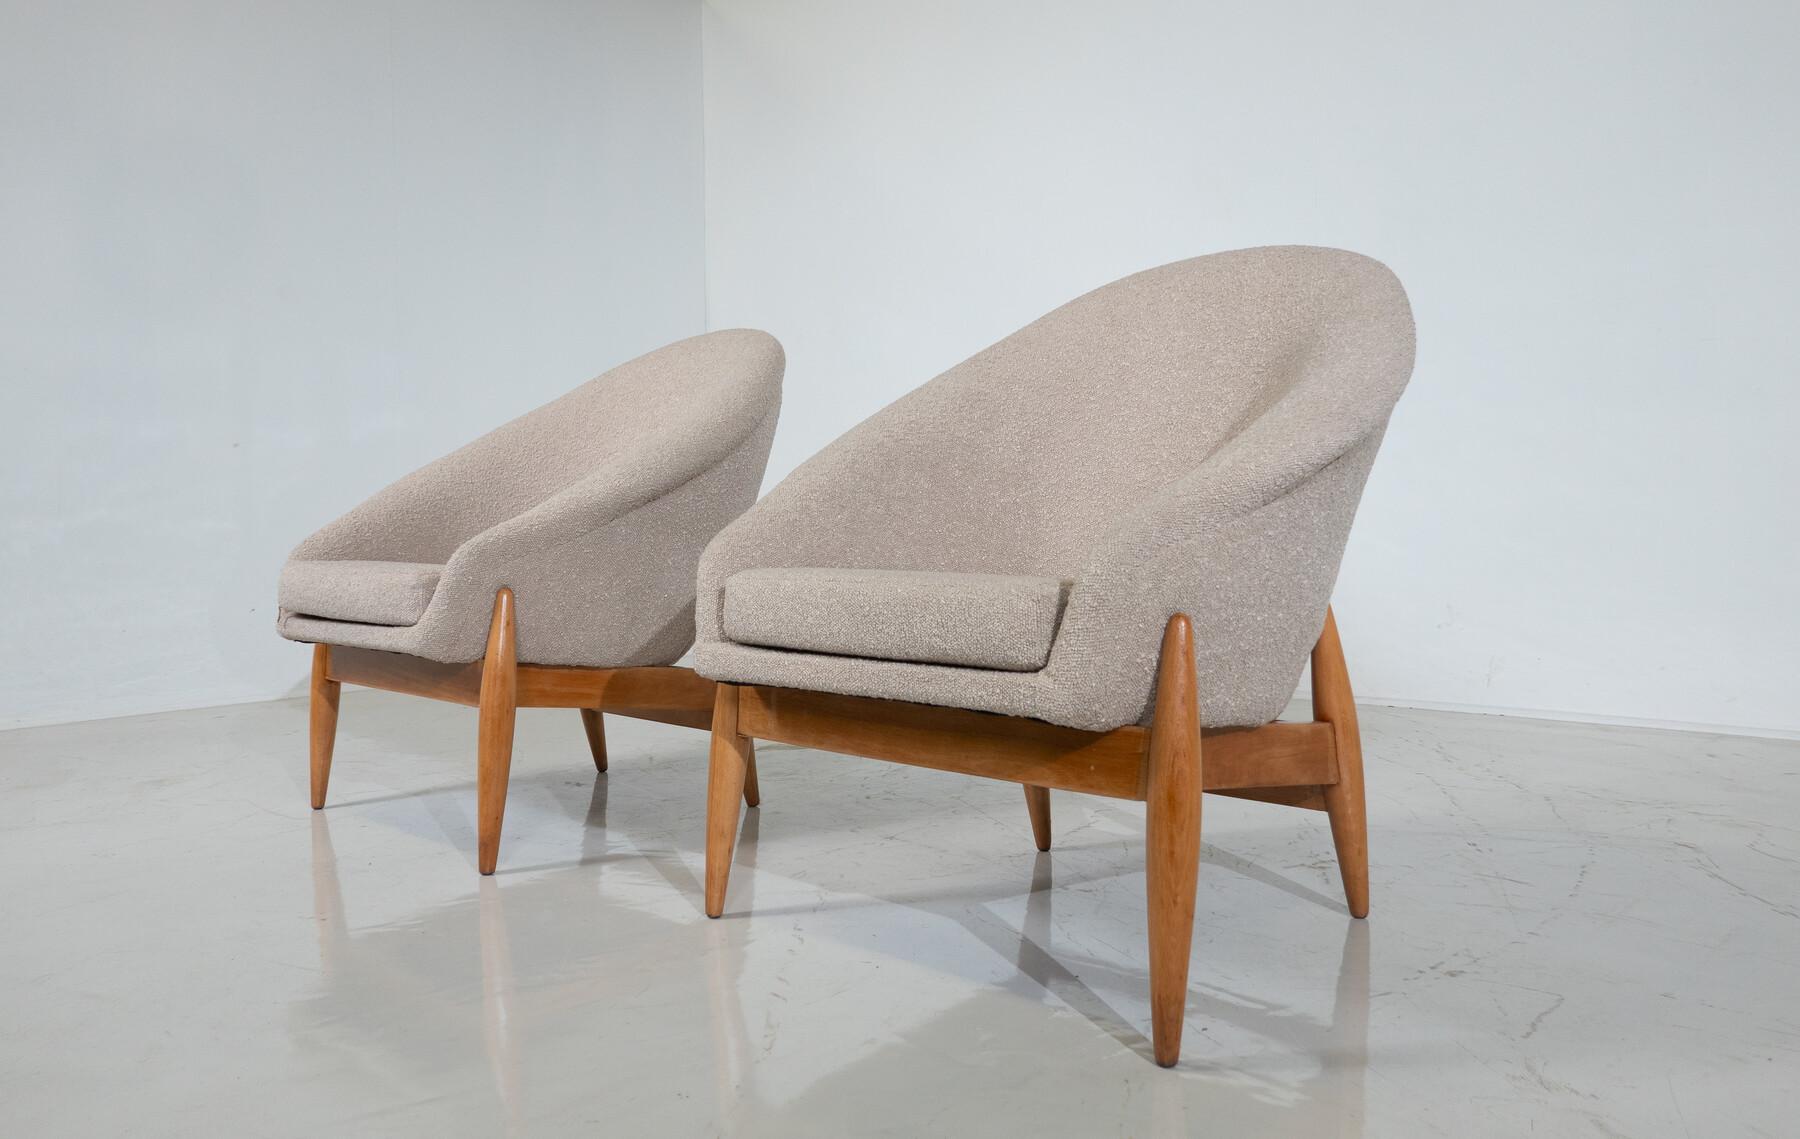 Pair of Mid-Century Modern Beige Fabric Armchairs by Julia Gaubek - Hungary 1950 For Sale 2